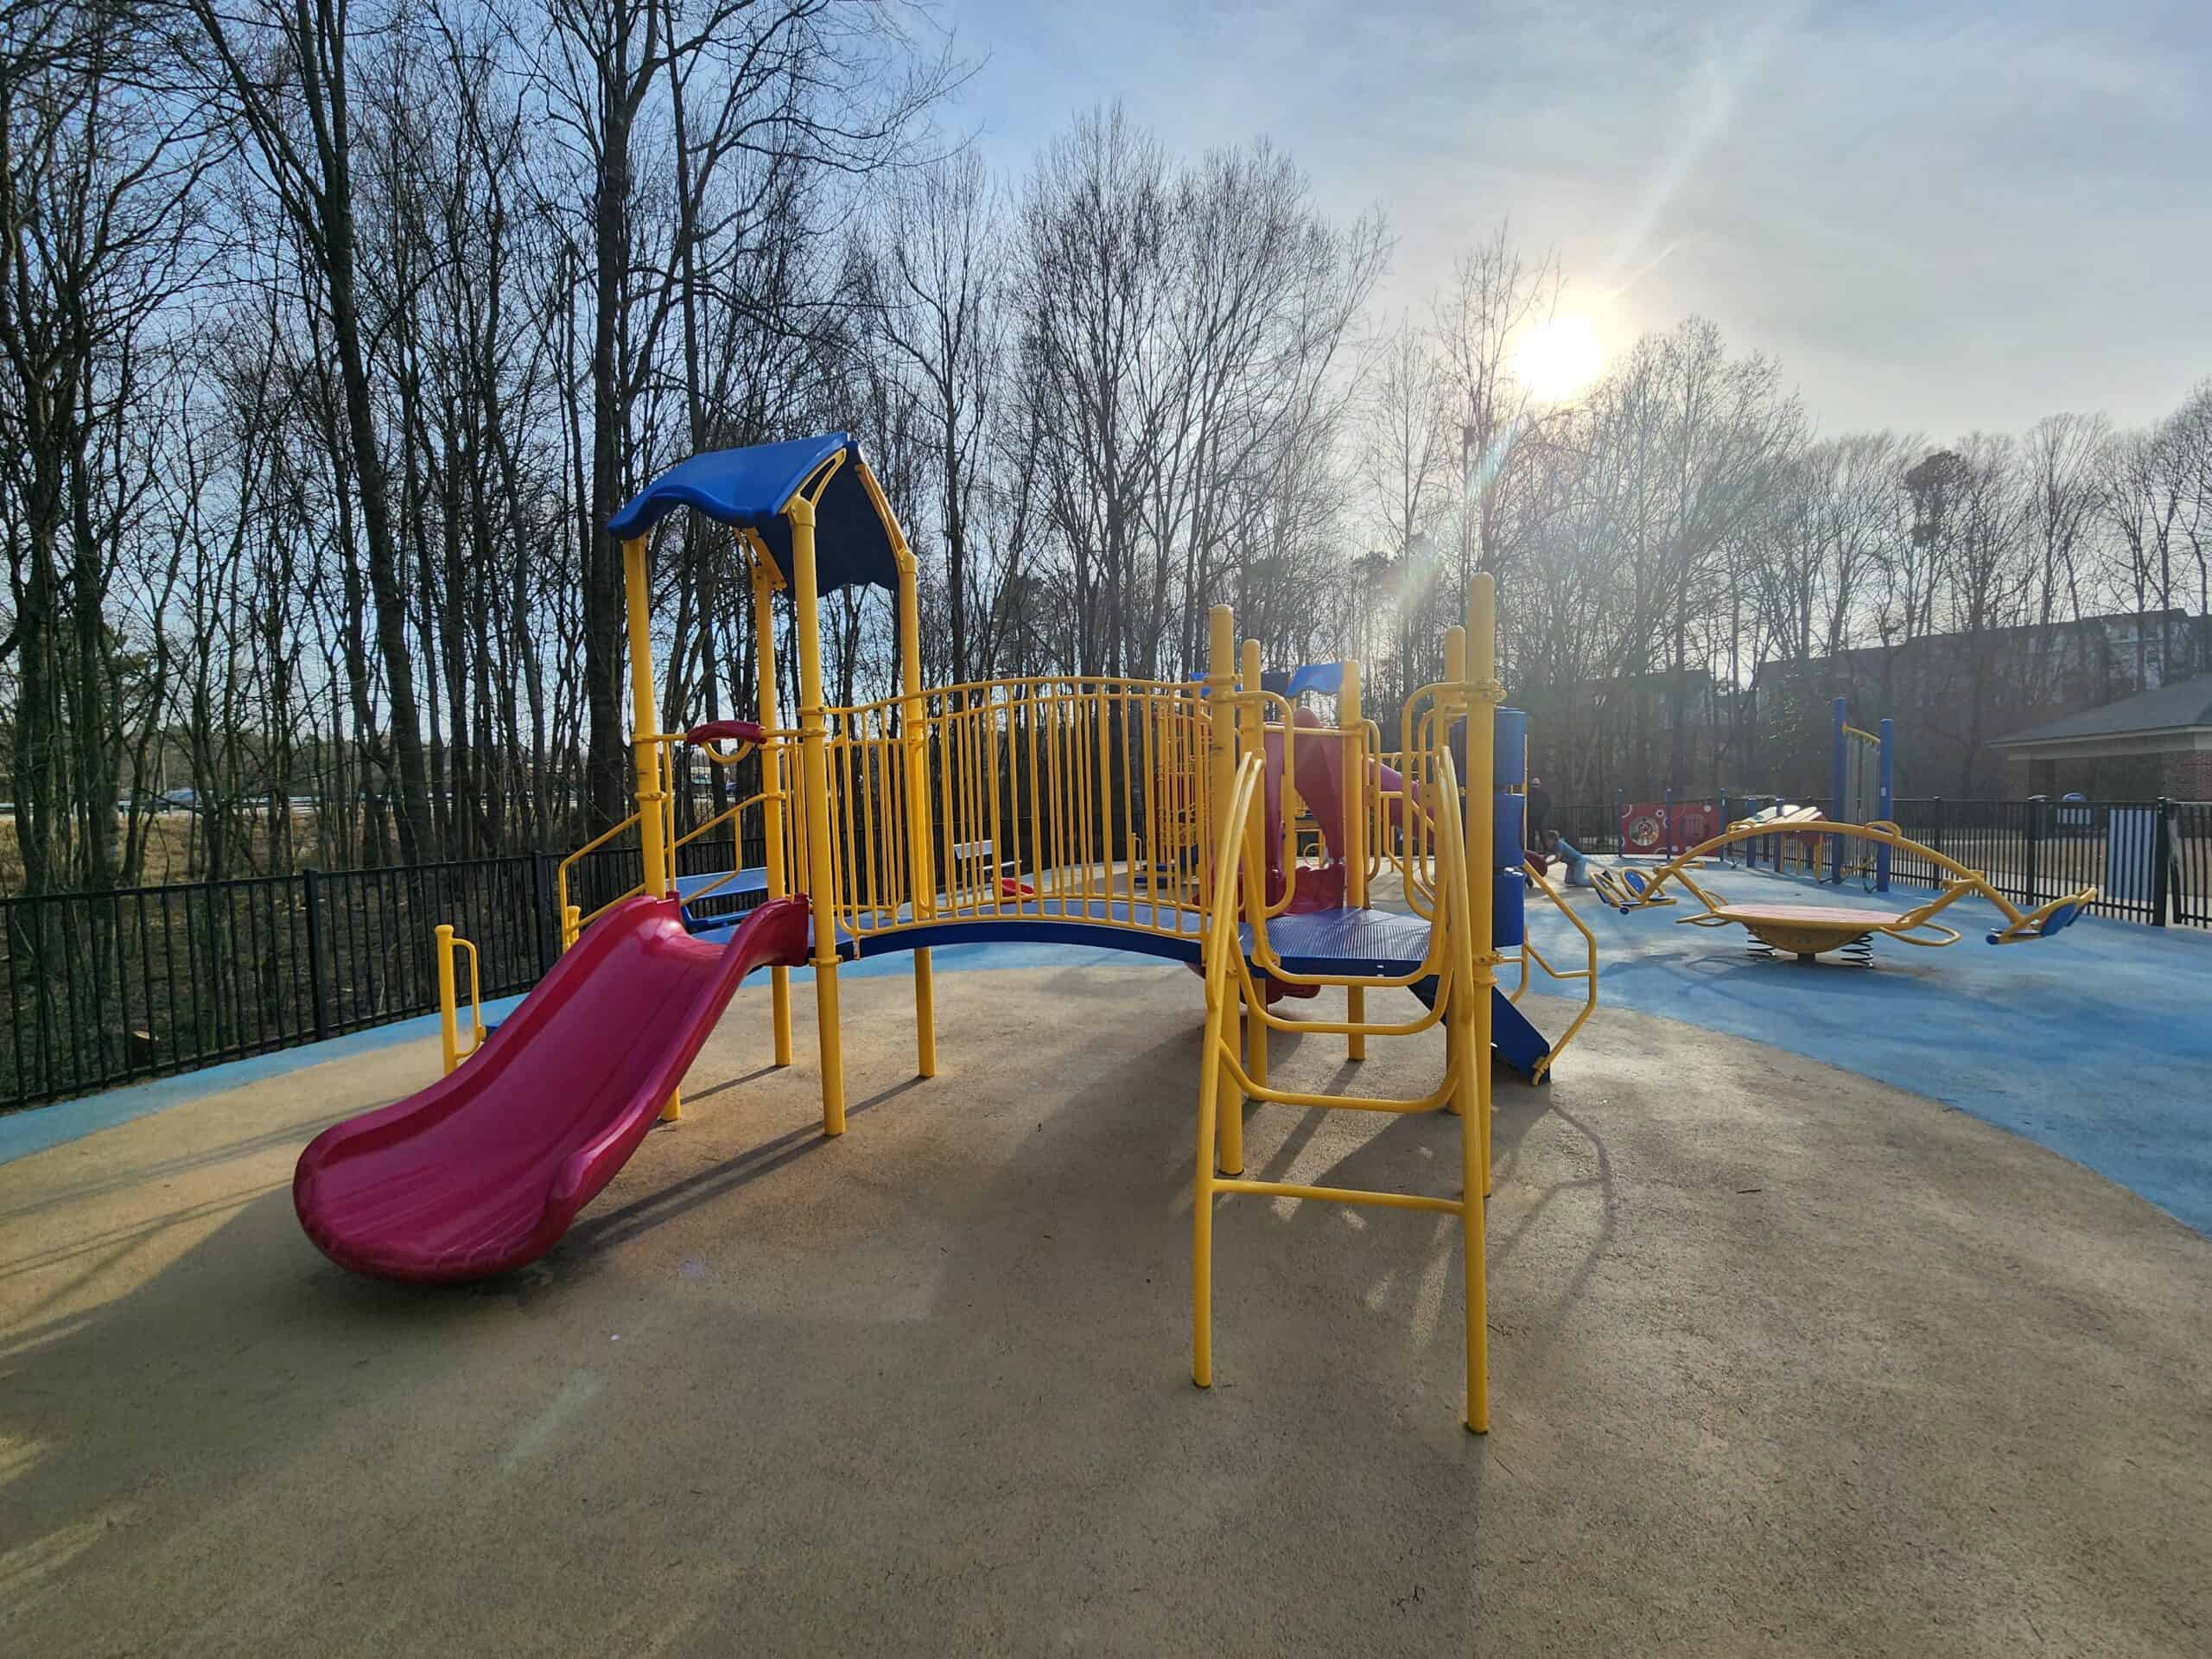 The warm glow of the setting sun illuminates a vibrant playground featuring yellow and blue equipment, including slides and climbing structures, set against a backdrop of leafless trees and a clear sky.